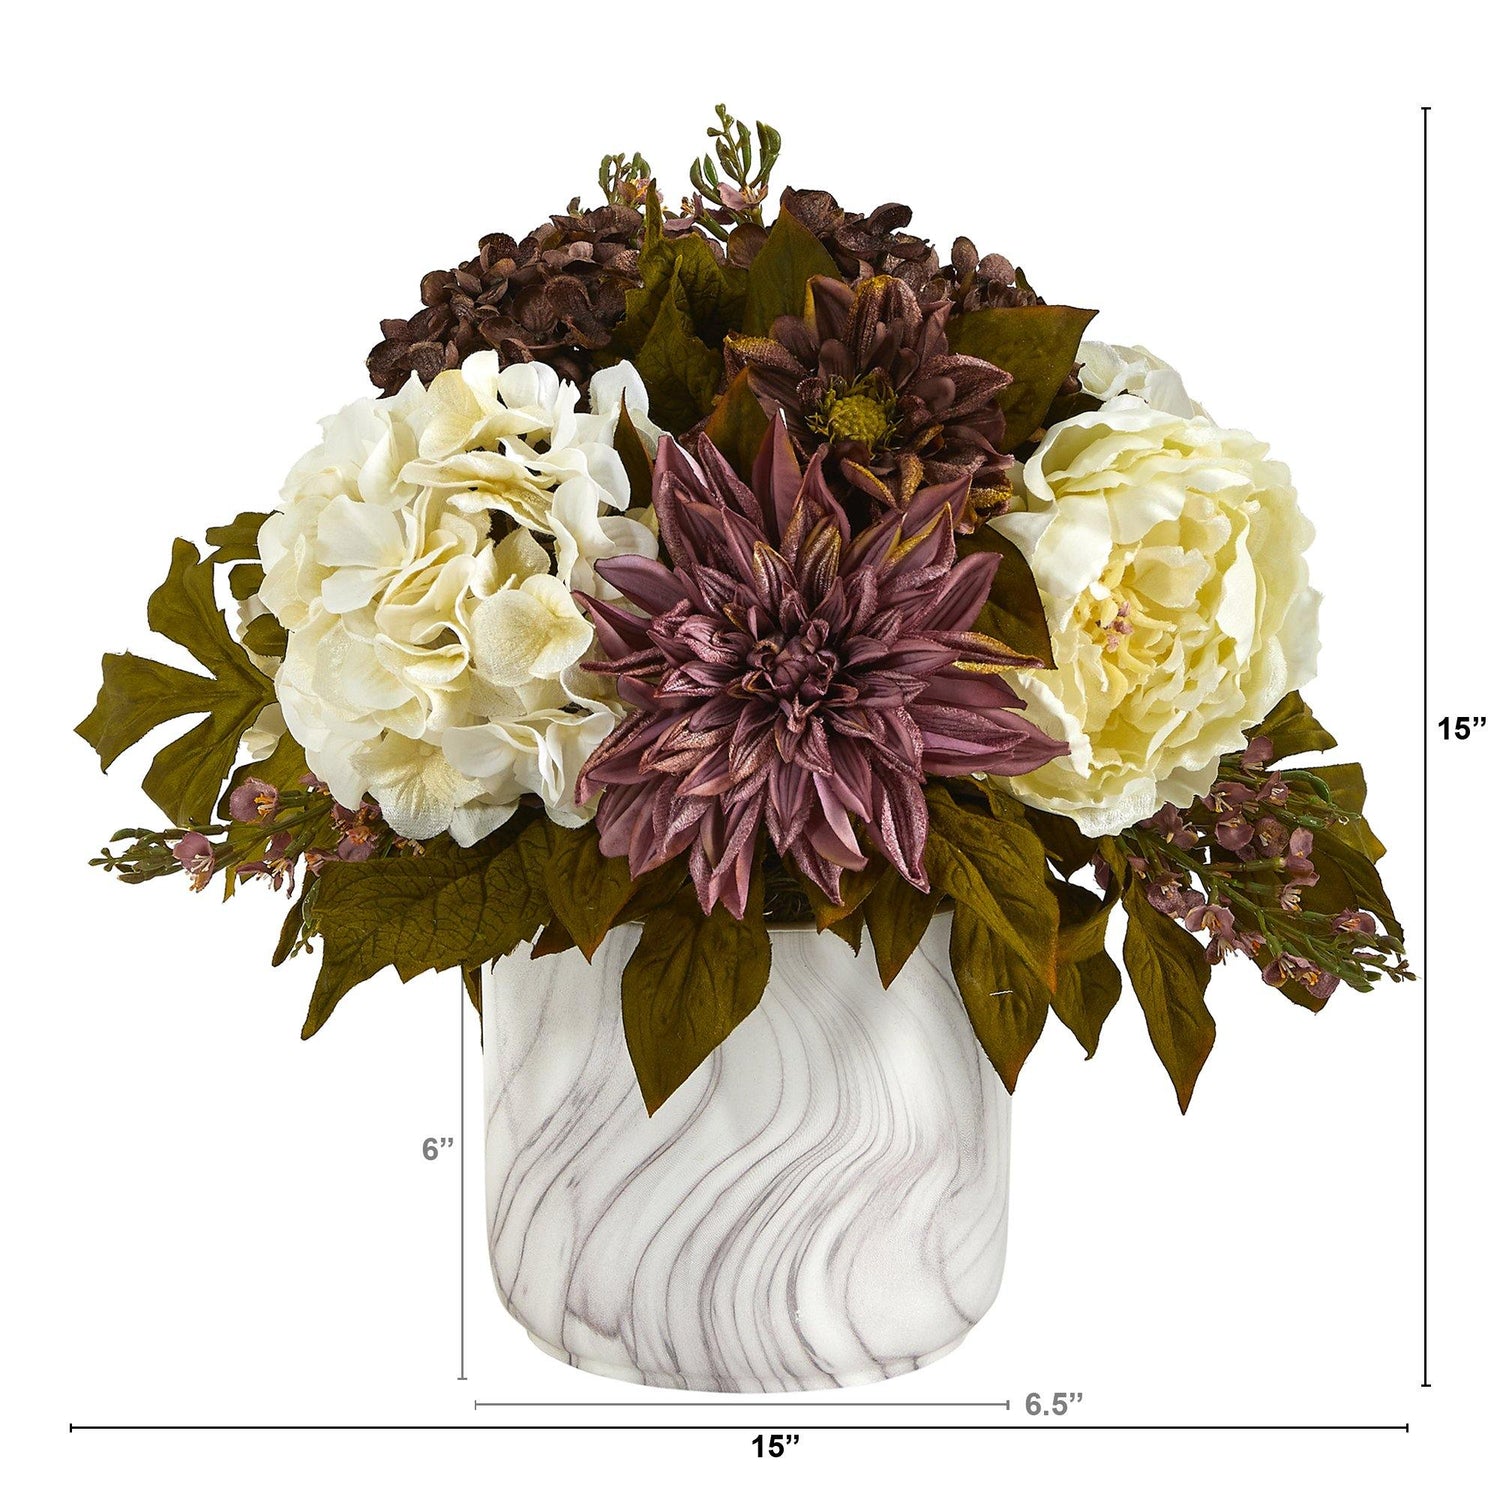 15” Peony, Hydrangea and Dahlia Artificial Arrangement in Marble Finished Vase